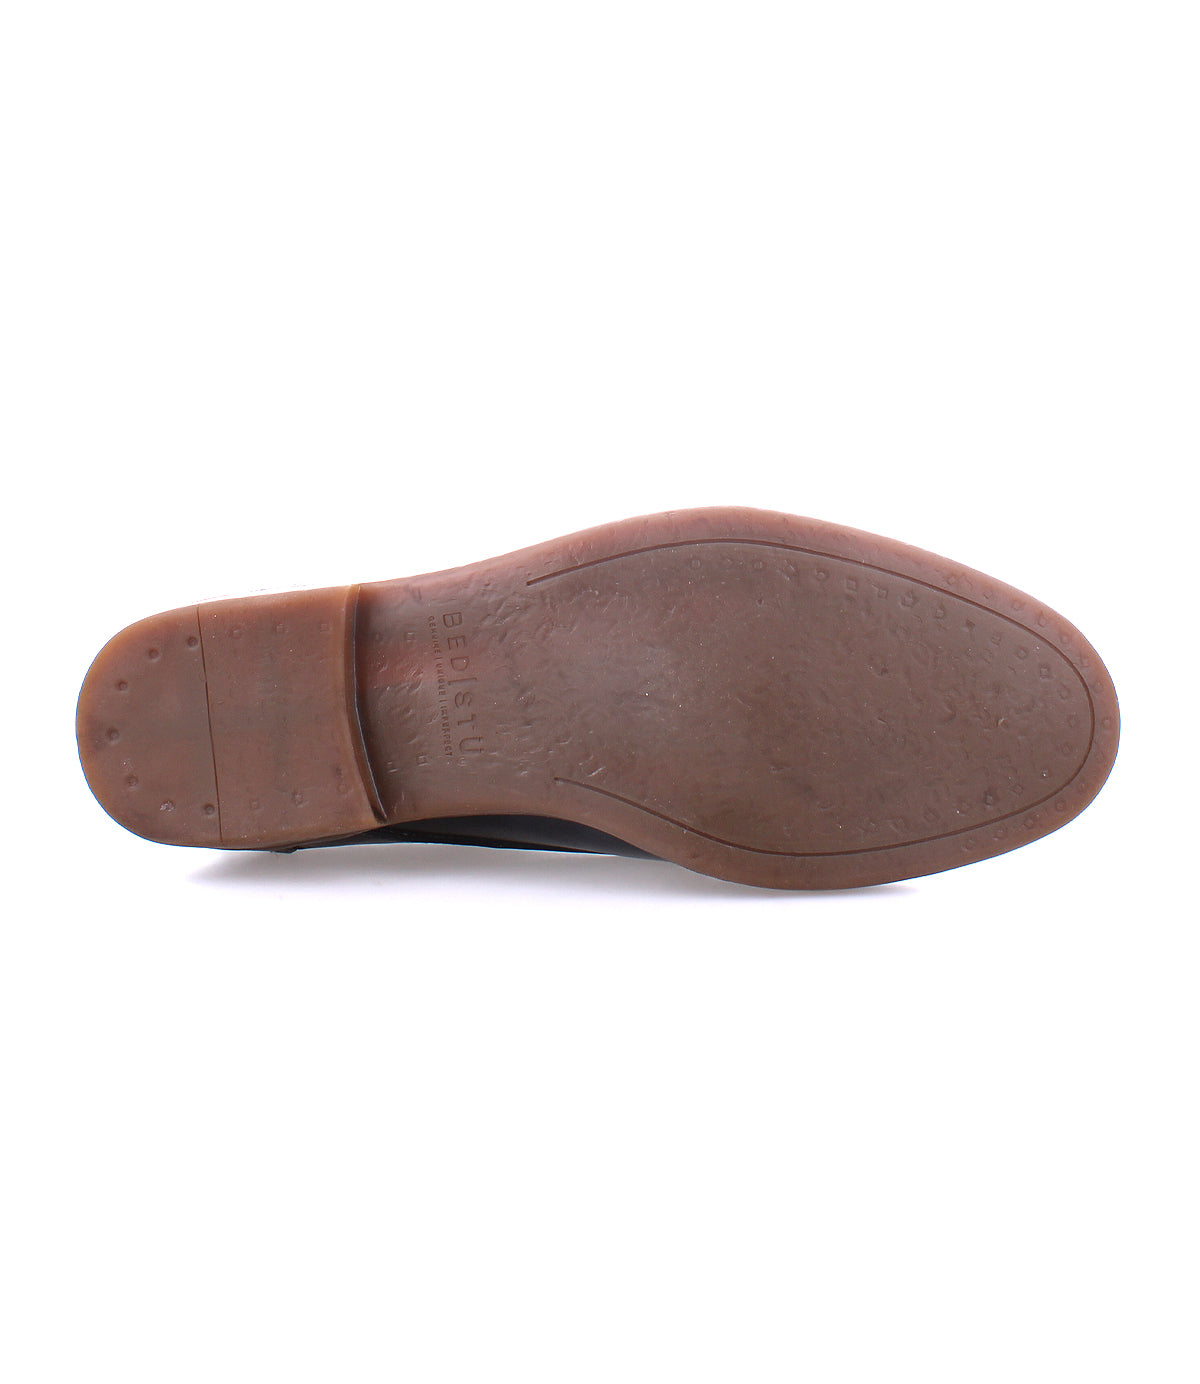 A sole of a Bed Stu Illiad Teak Rustic Boot displayed against a white background, showing minimal wear and brand embossing.